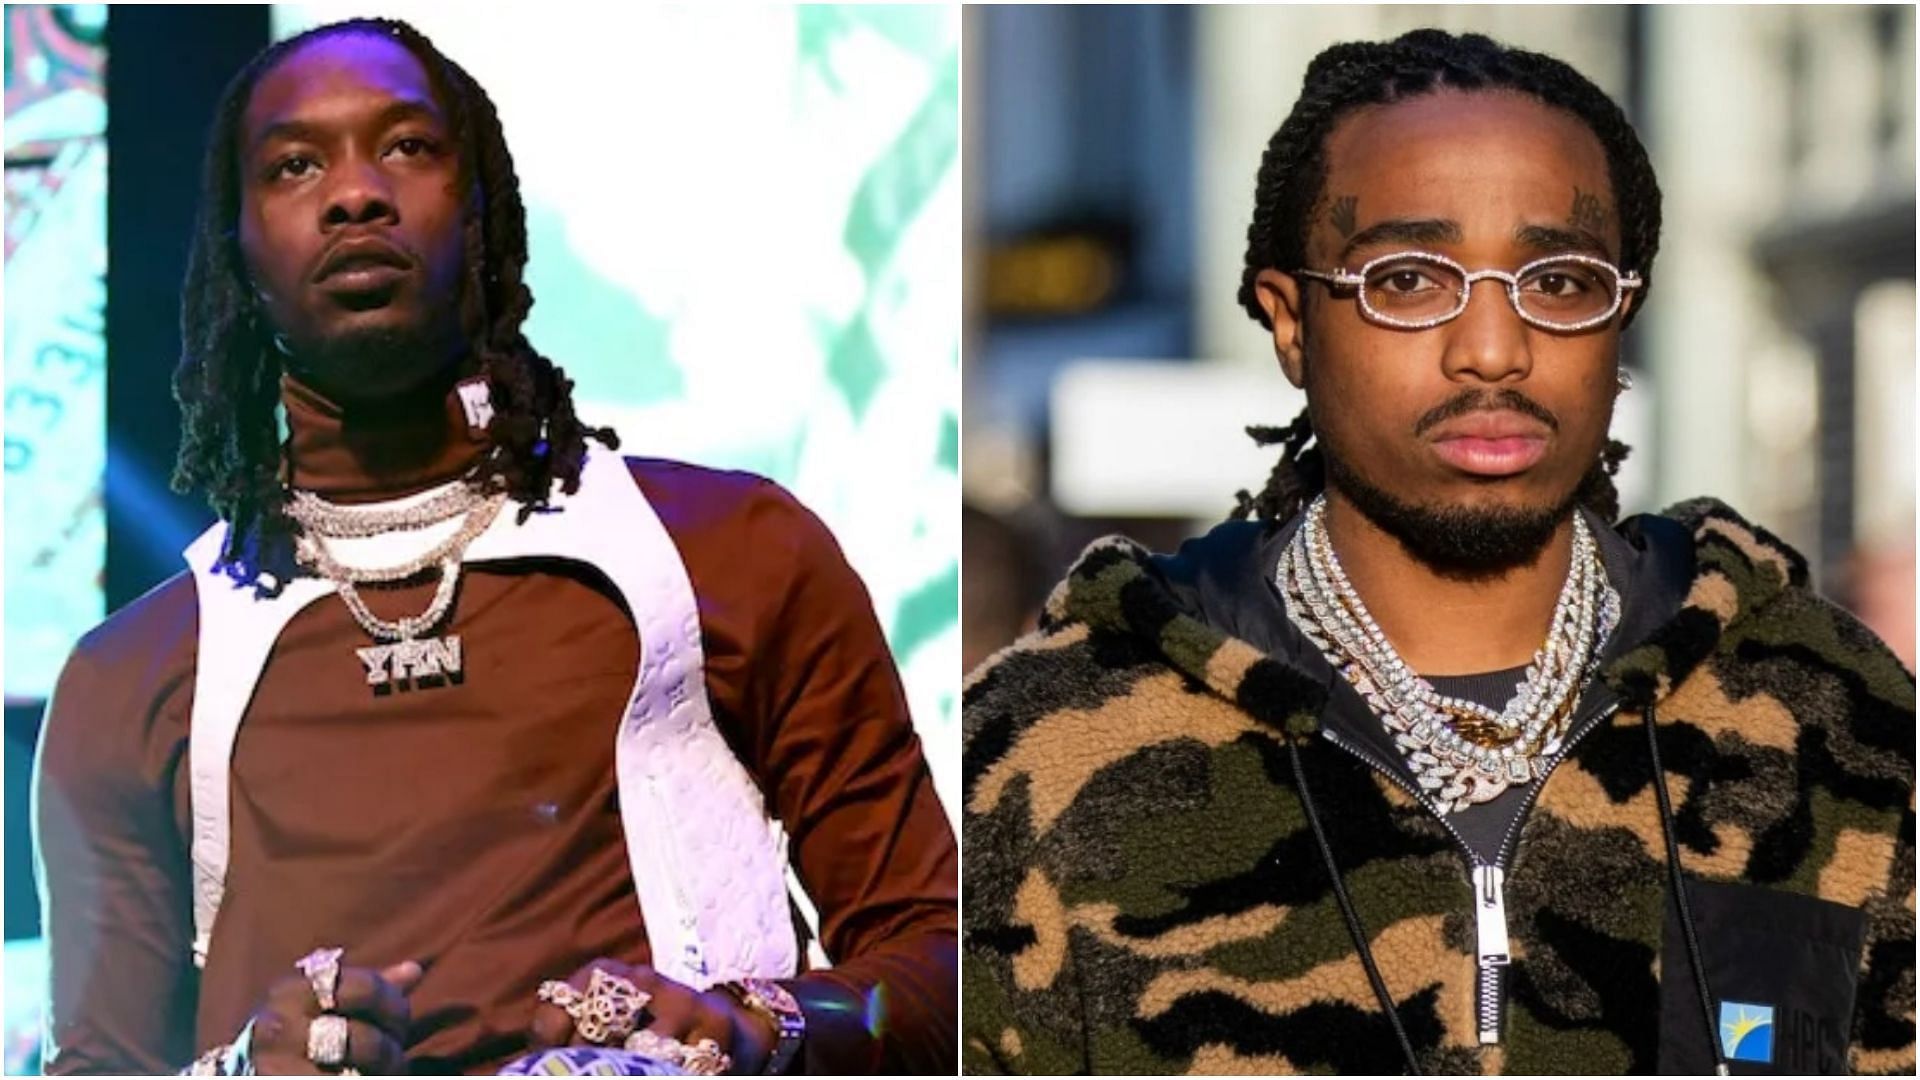 Offset Shares Statement in Honor of Migos' Takeoff